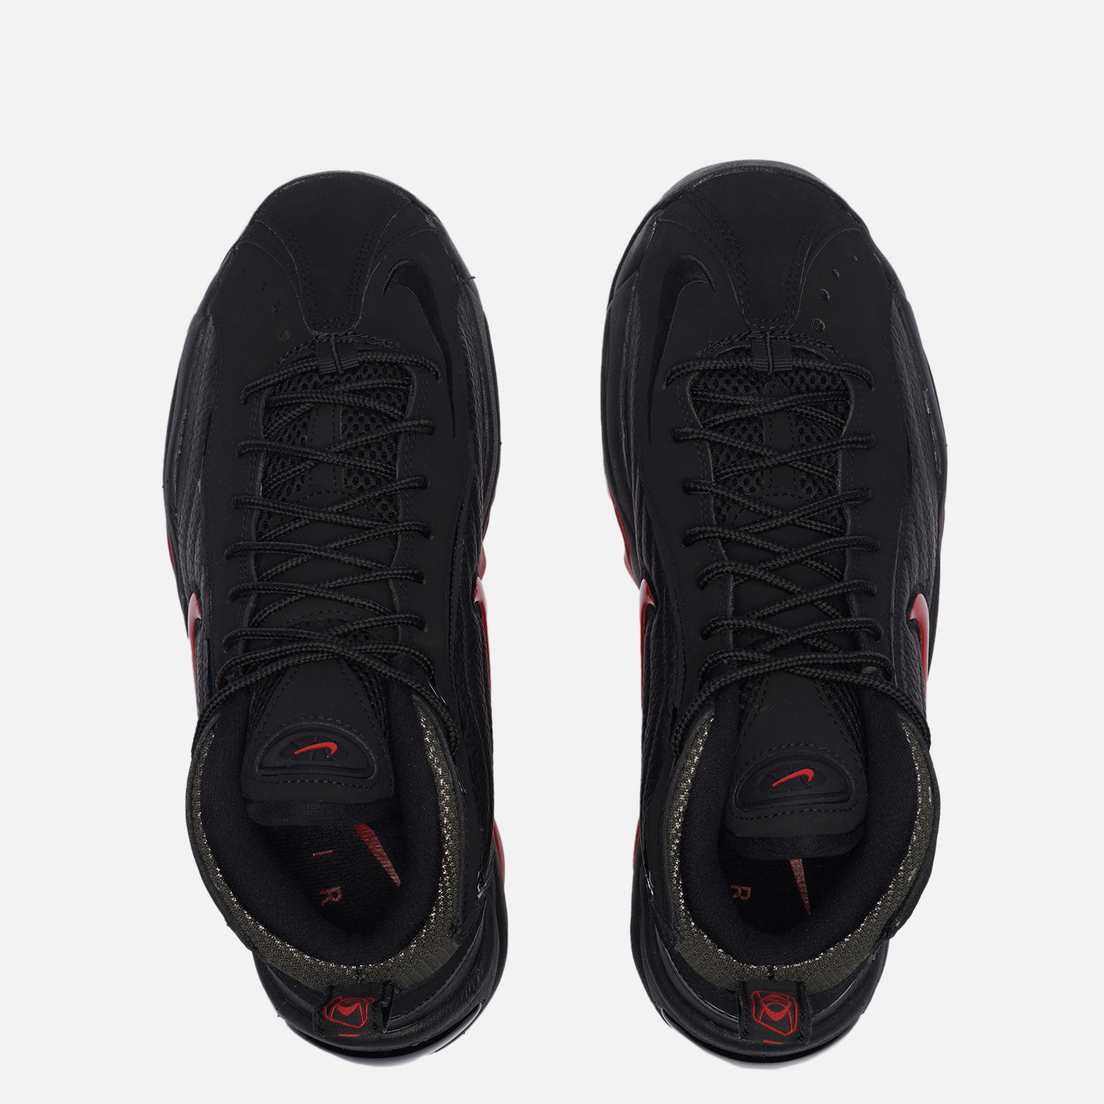 Nike Мужские кроссовки Air Total Max Uptempo Bred